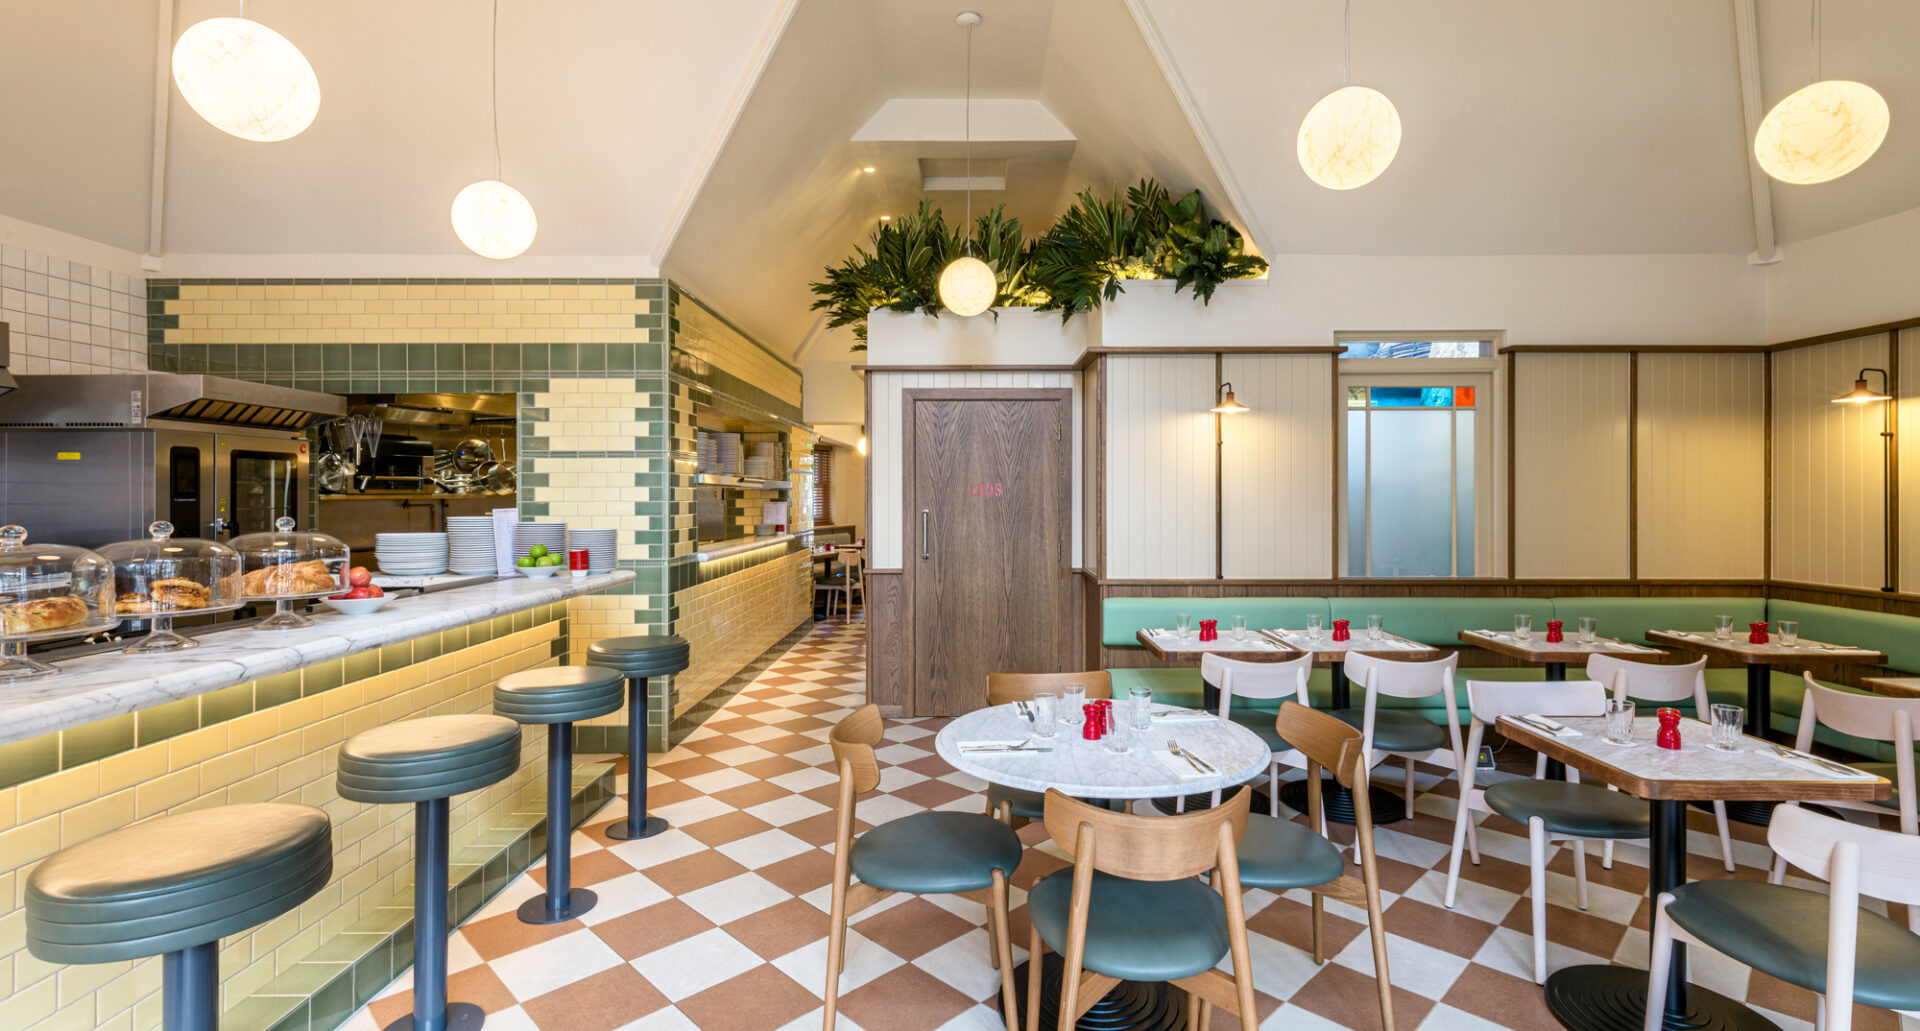 Audrey's Cafe & Bar Borough modern and retro restaurant designed by 3Stories Interior Design and branding creative agency London, featuring checkered floor, victorian inspired tiles, open kitchen and hanging lights, cosy and unpretencious interior